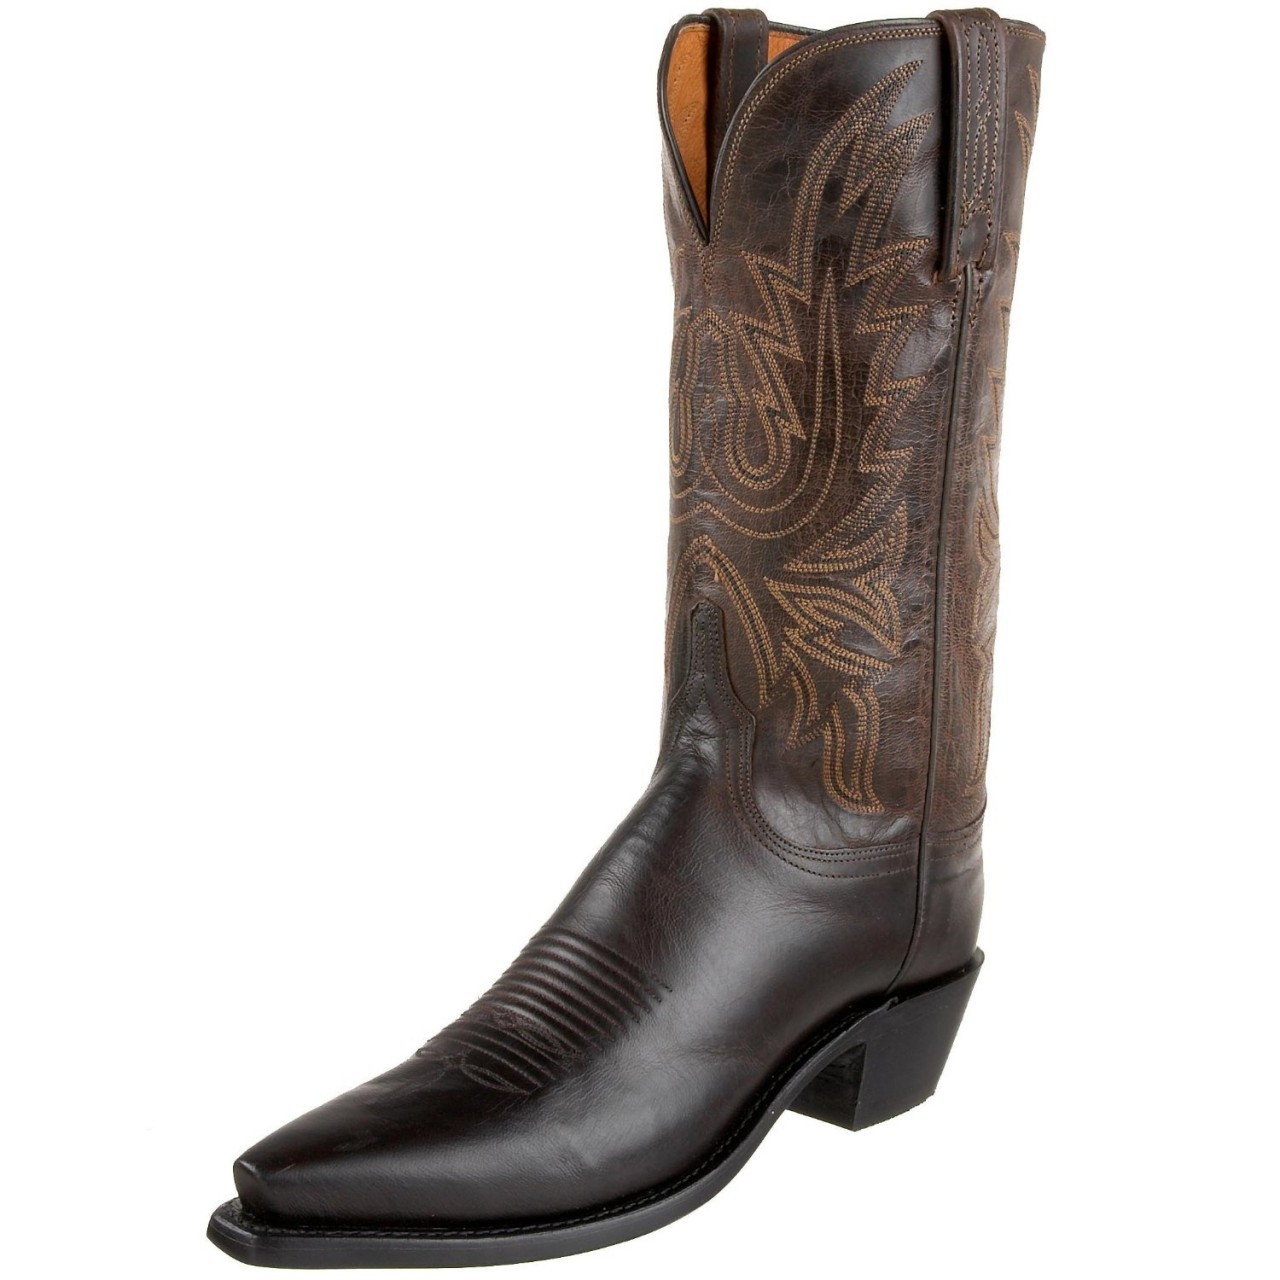 Lucchese 1883 Women's leather Cowboy Boots N4554 Brown - Davinci ...